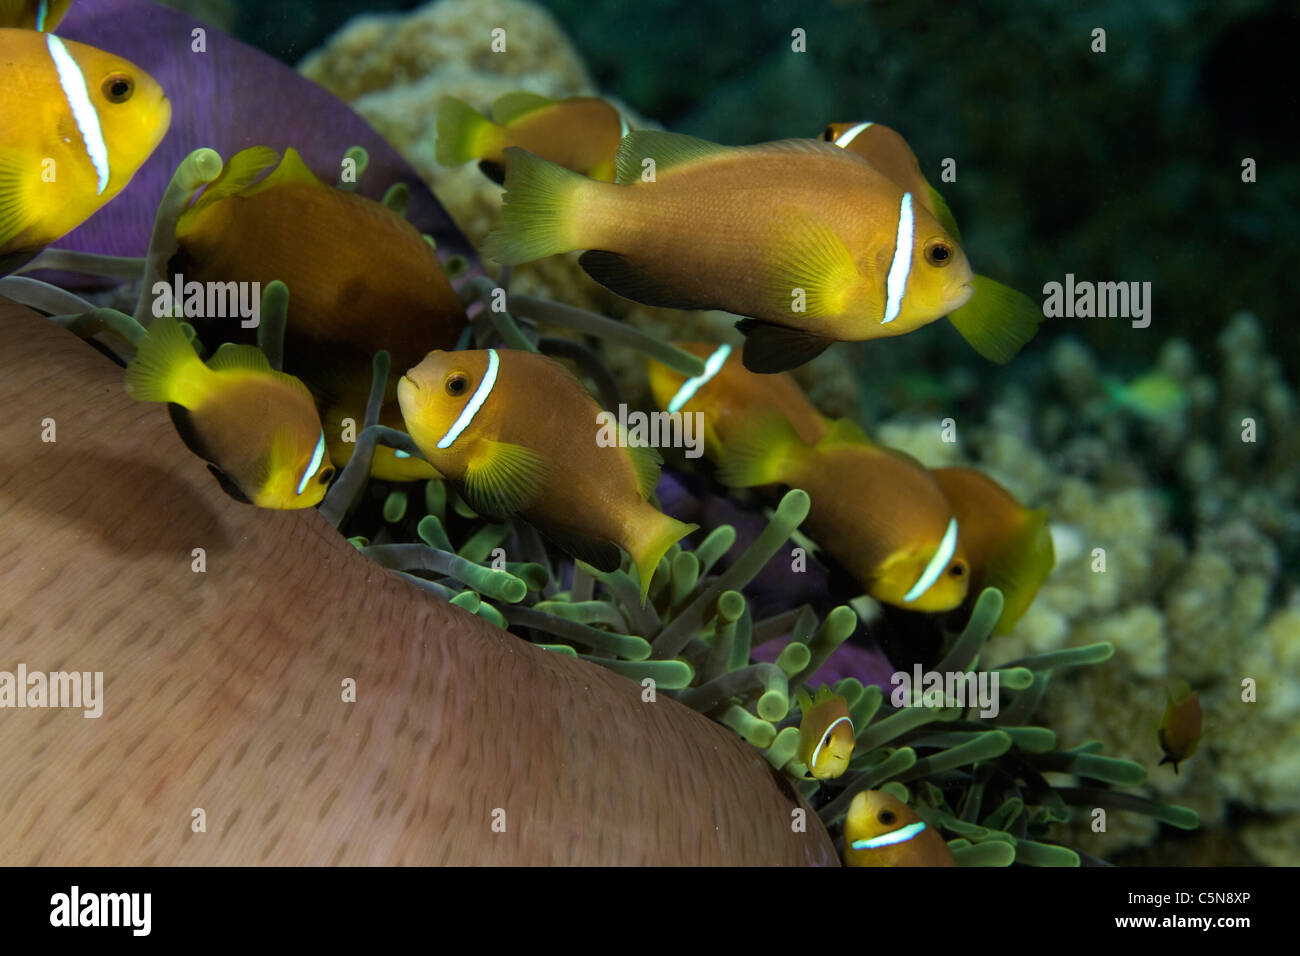 Family of Maldive Anemonefish in Magnificent Anemone, Amphiprion nigripes, Heteractis magnifica, Indian Ocean, Maldives Stock Photo